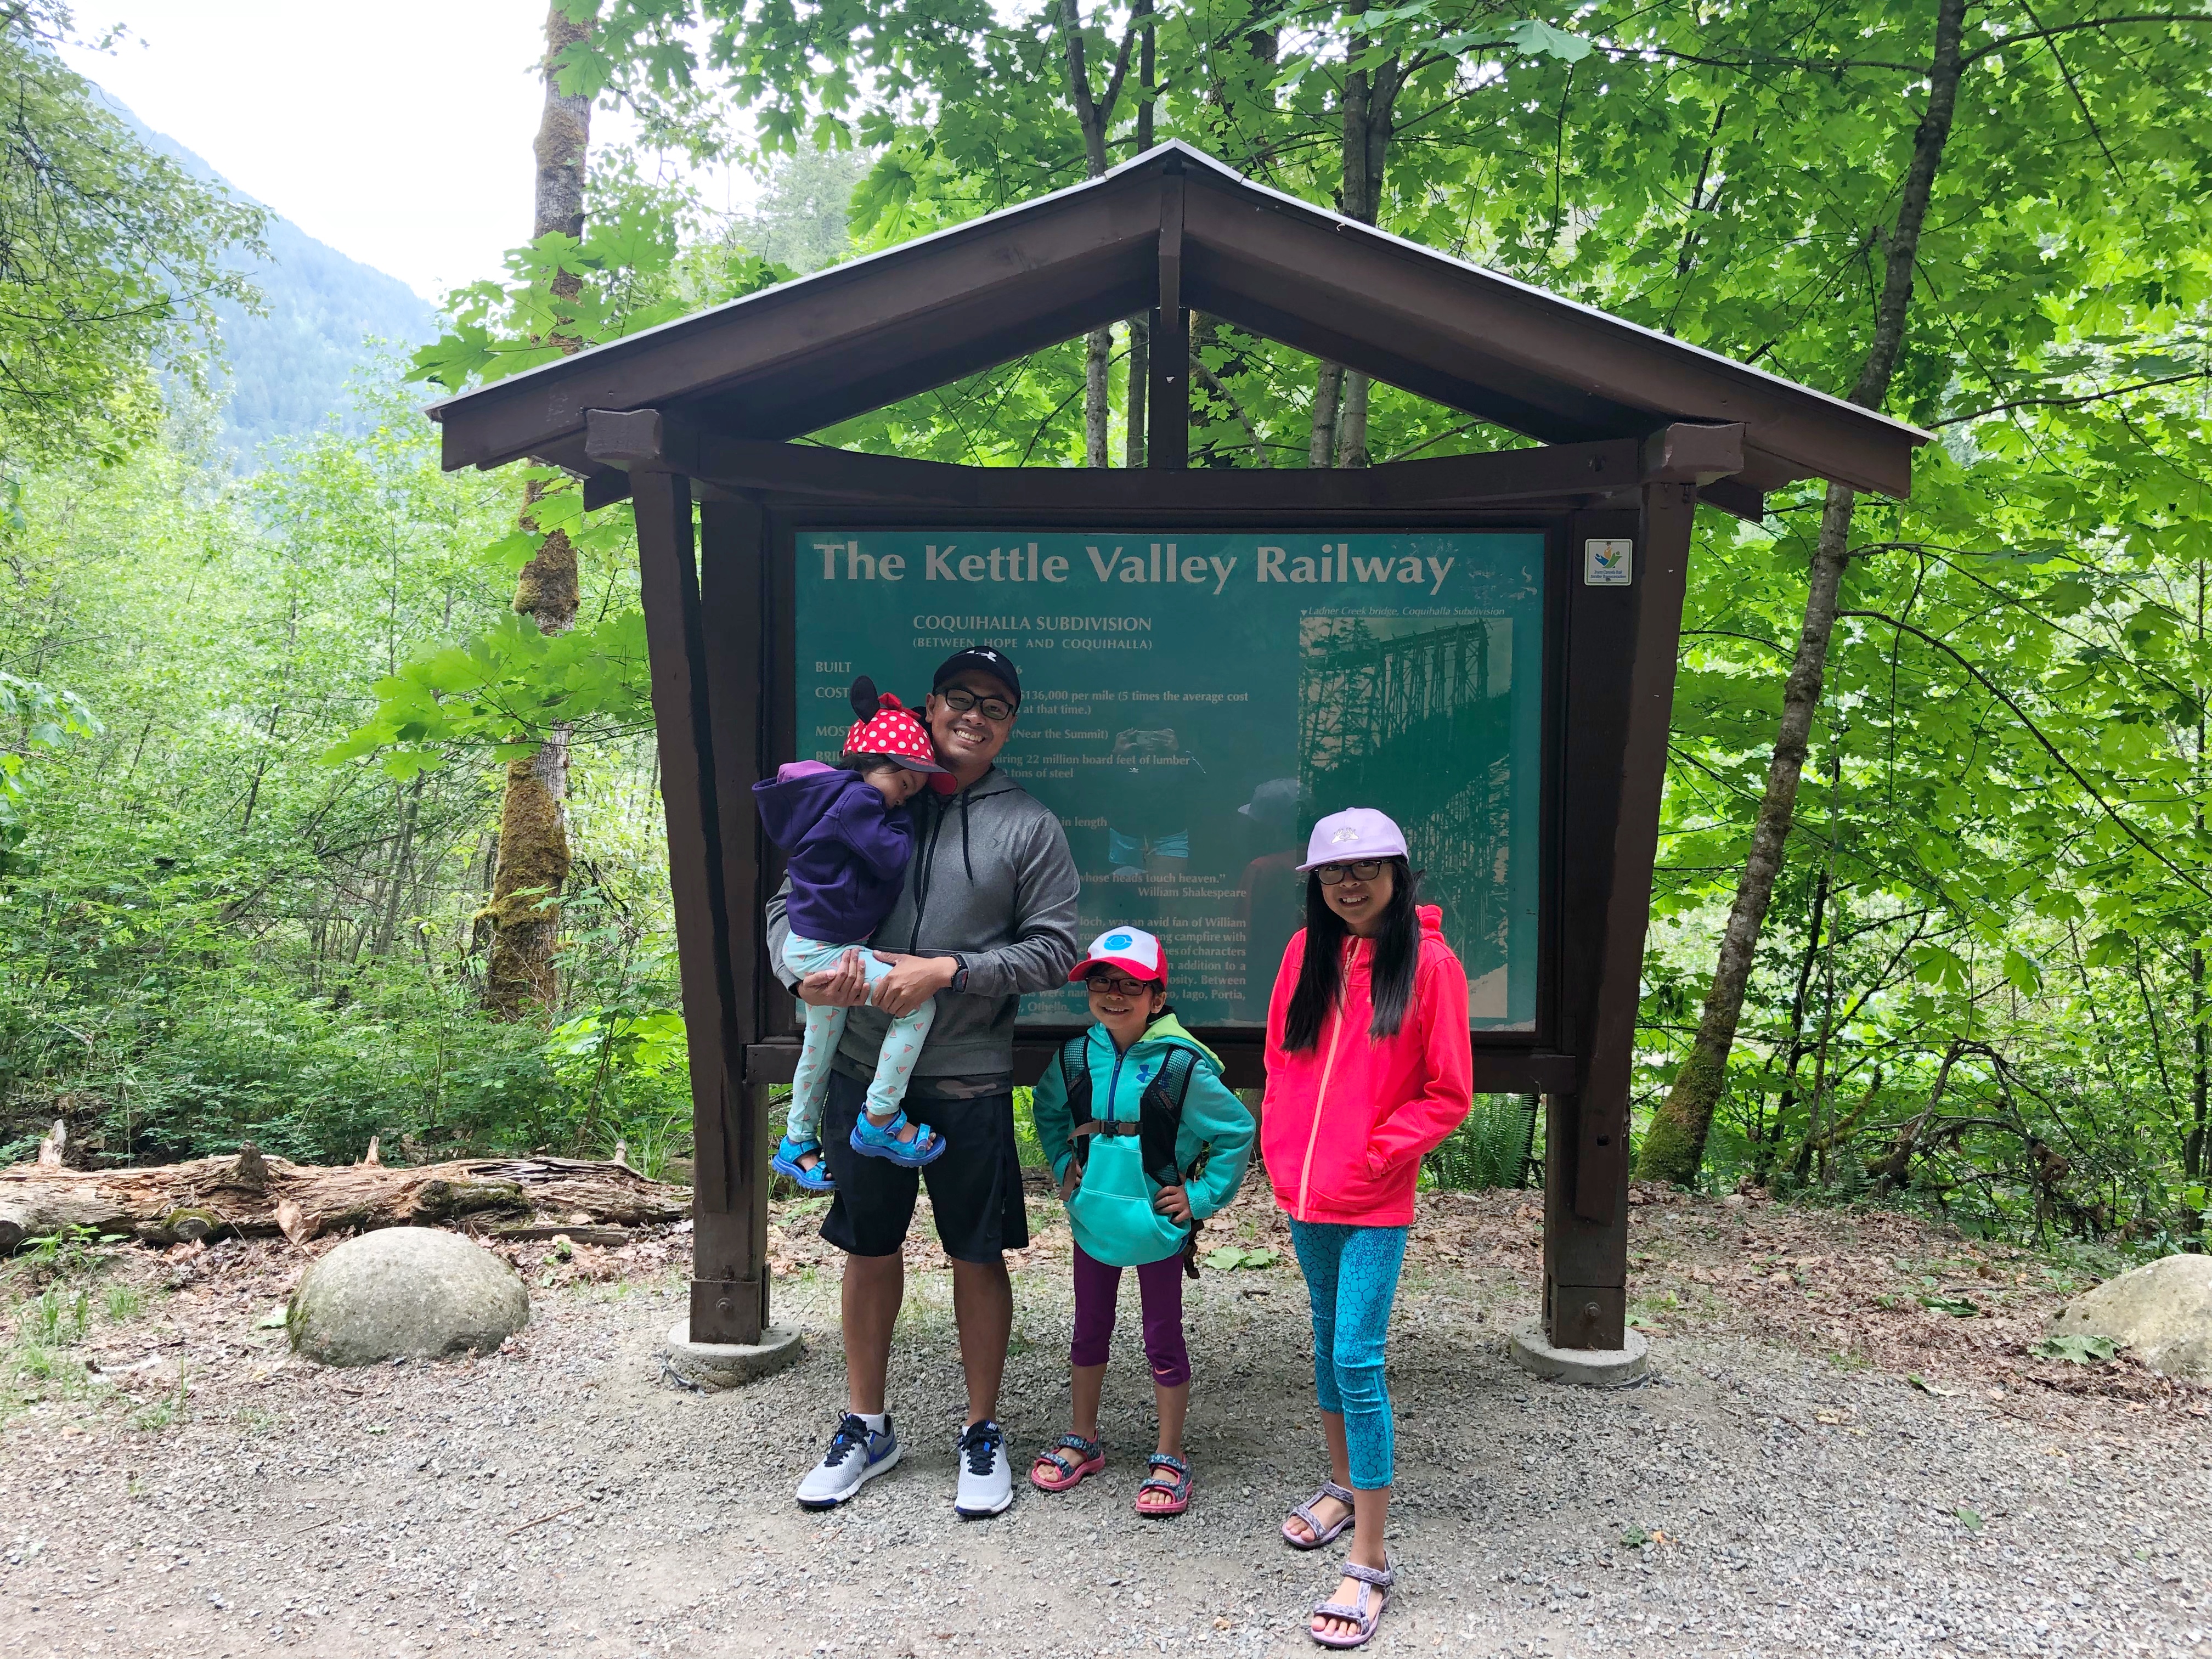 othello tunnels Hike, hope BC - family friendly hikes in BC - family friendly hikes in hope - Family friendly hikes in Vancouver - hiking adventures - kid friendly hikes in vancouver - easy summer hikes - easy hikes in vancouver -bethalylovebeauty.com